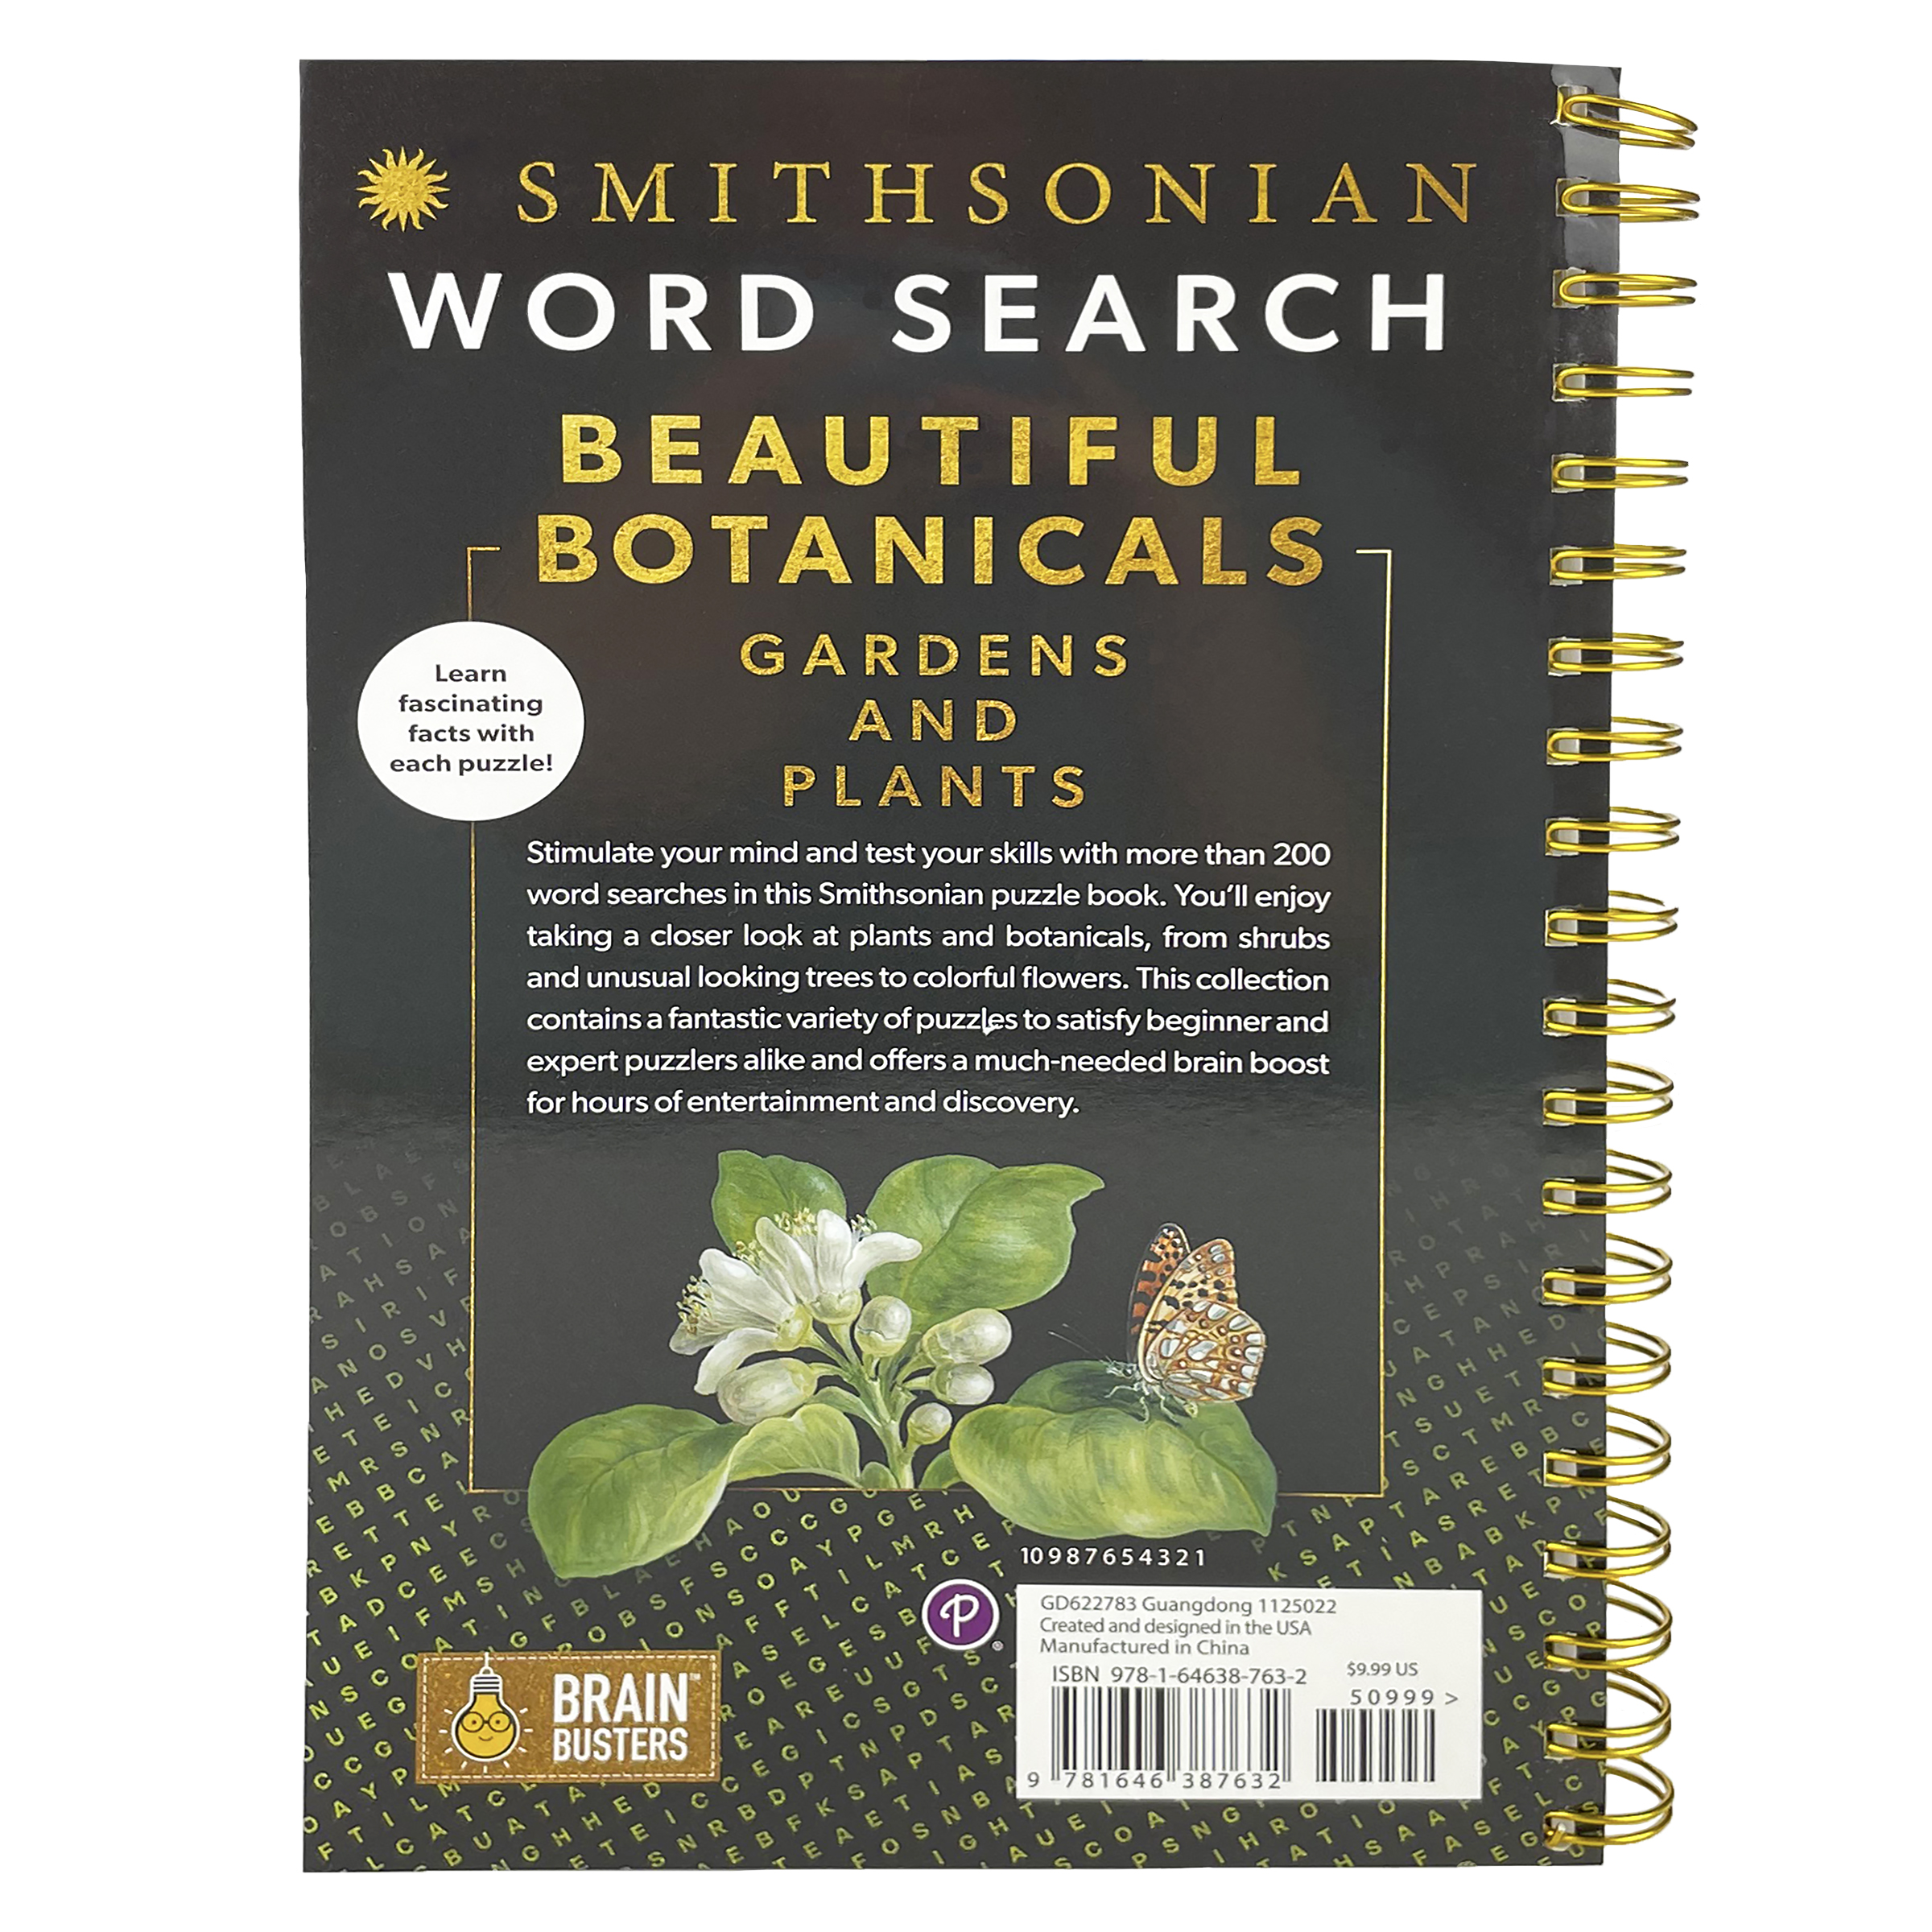 Smithsonian Word Search Beautiful Botanicals Gardens and Plants